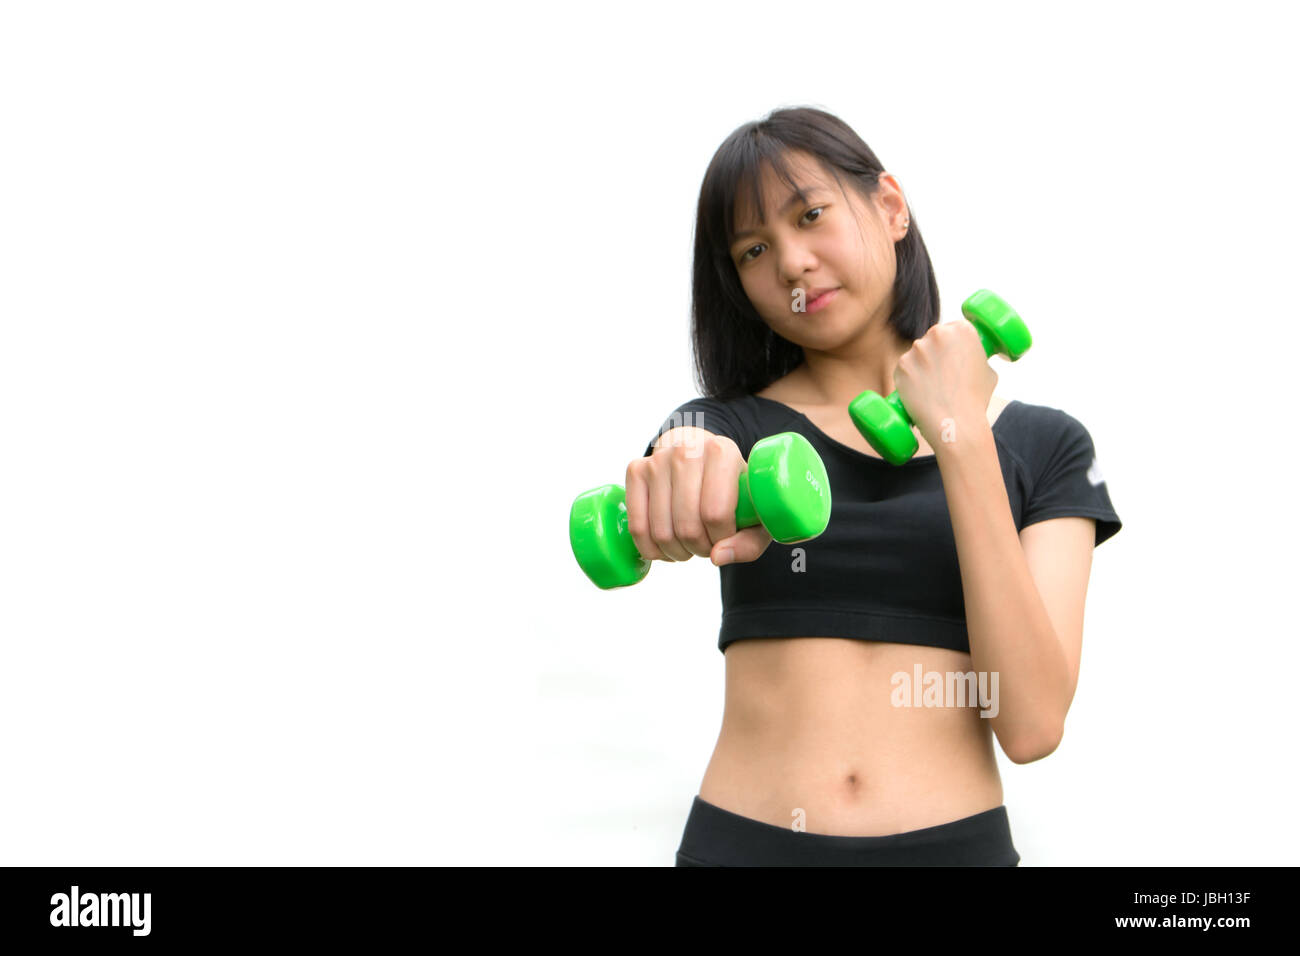 Attractive young fitness woman holding dumbbells isolated on white background. Stock Photo